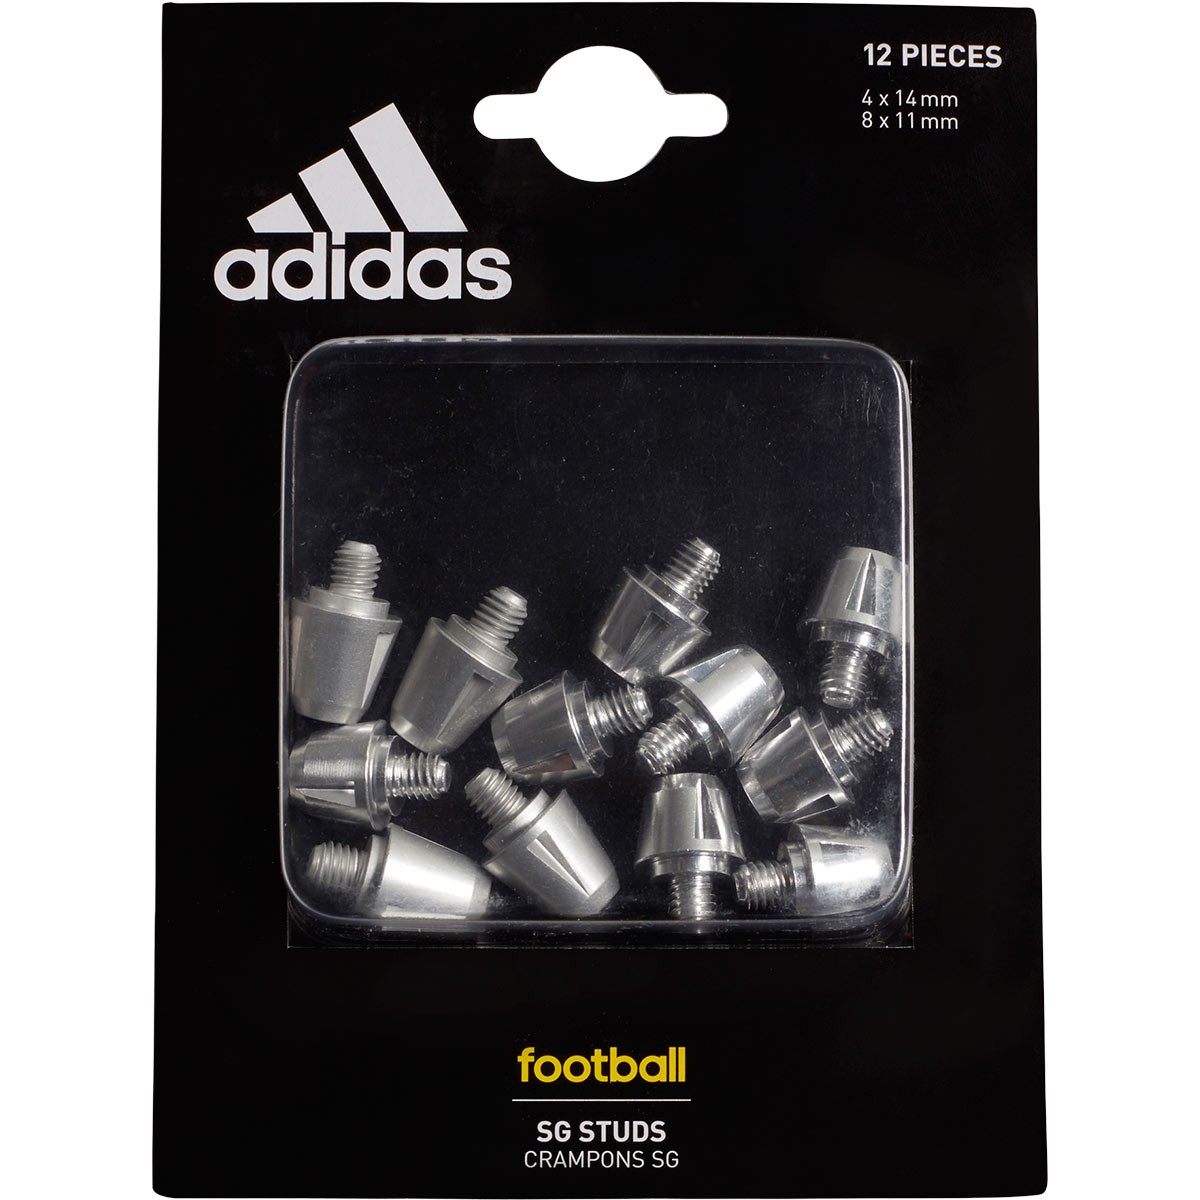 Studs adidas SG ( 4 of 14 mm - 8 of 11 